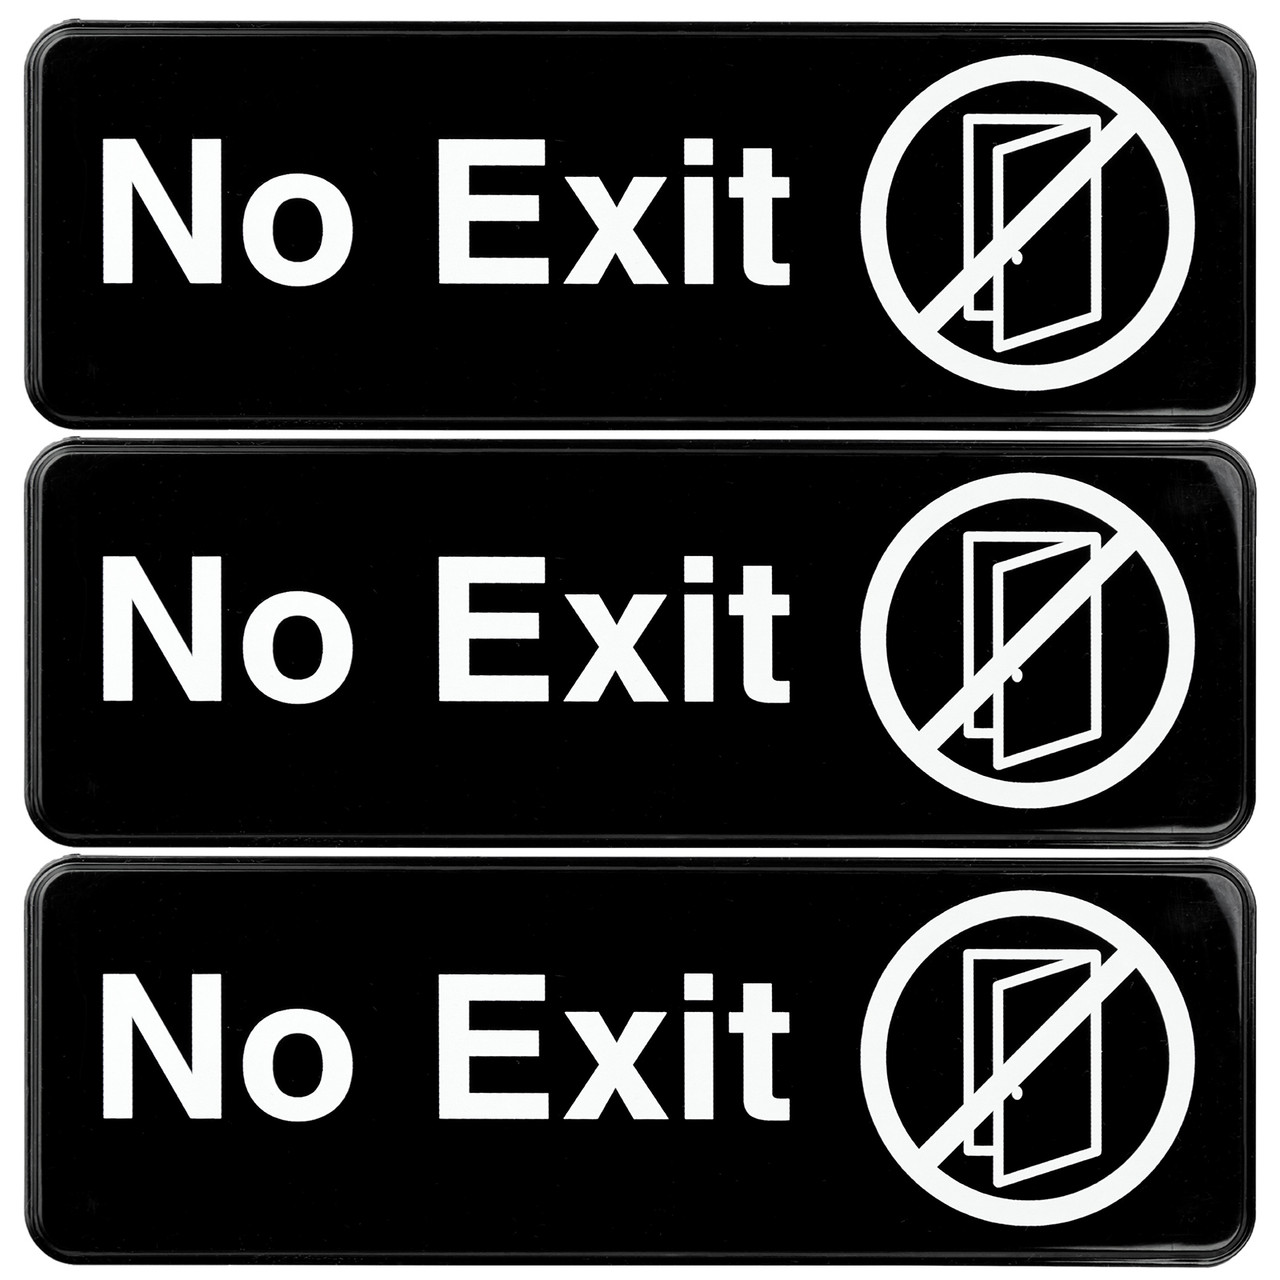 No Exit Sign: Easy to Mount with Symbols 9x3